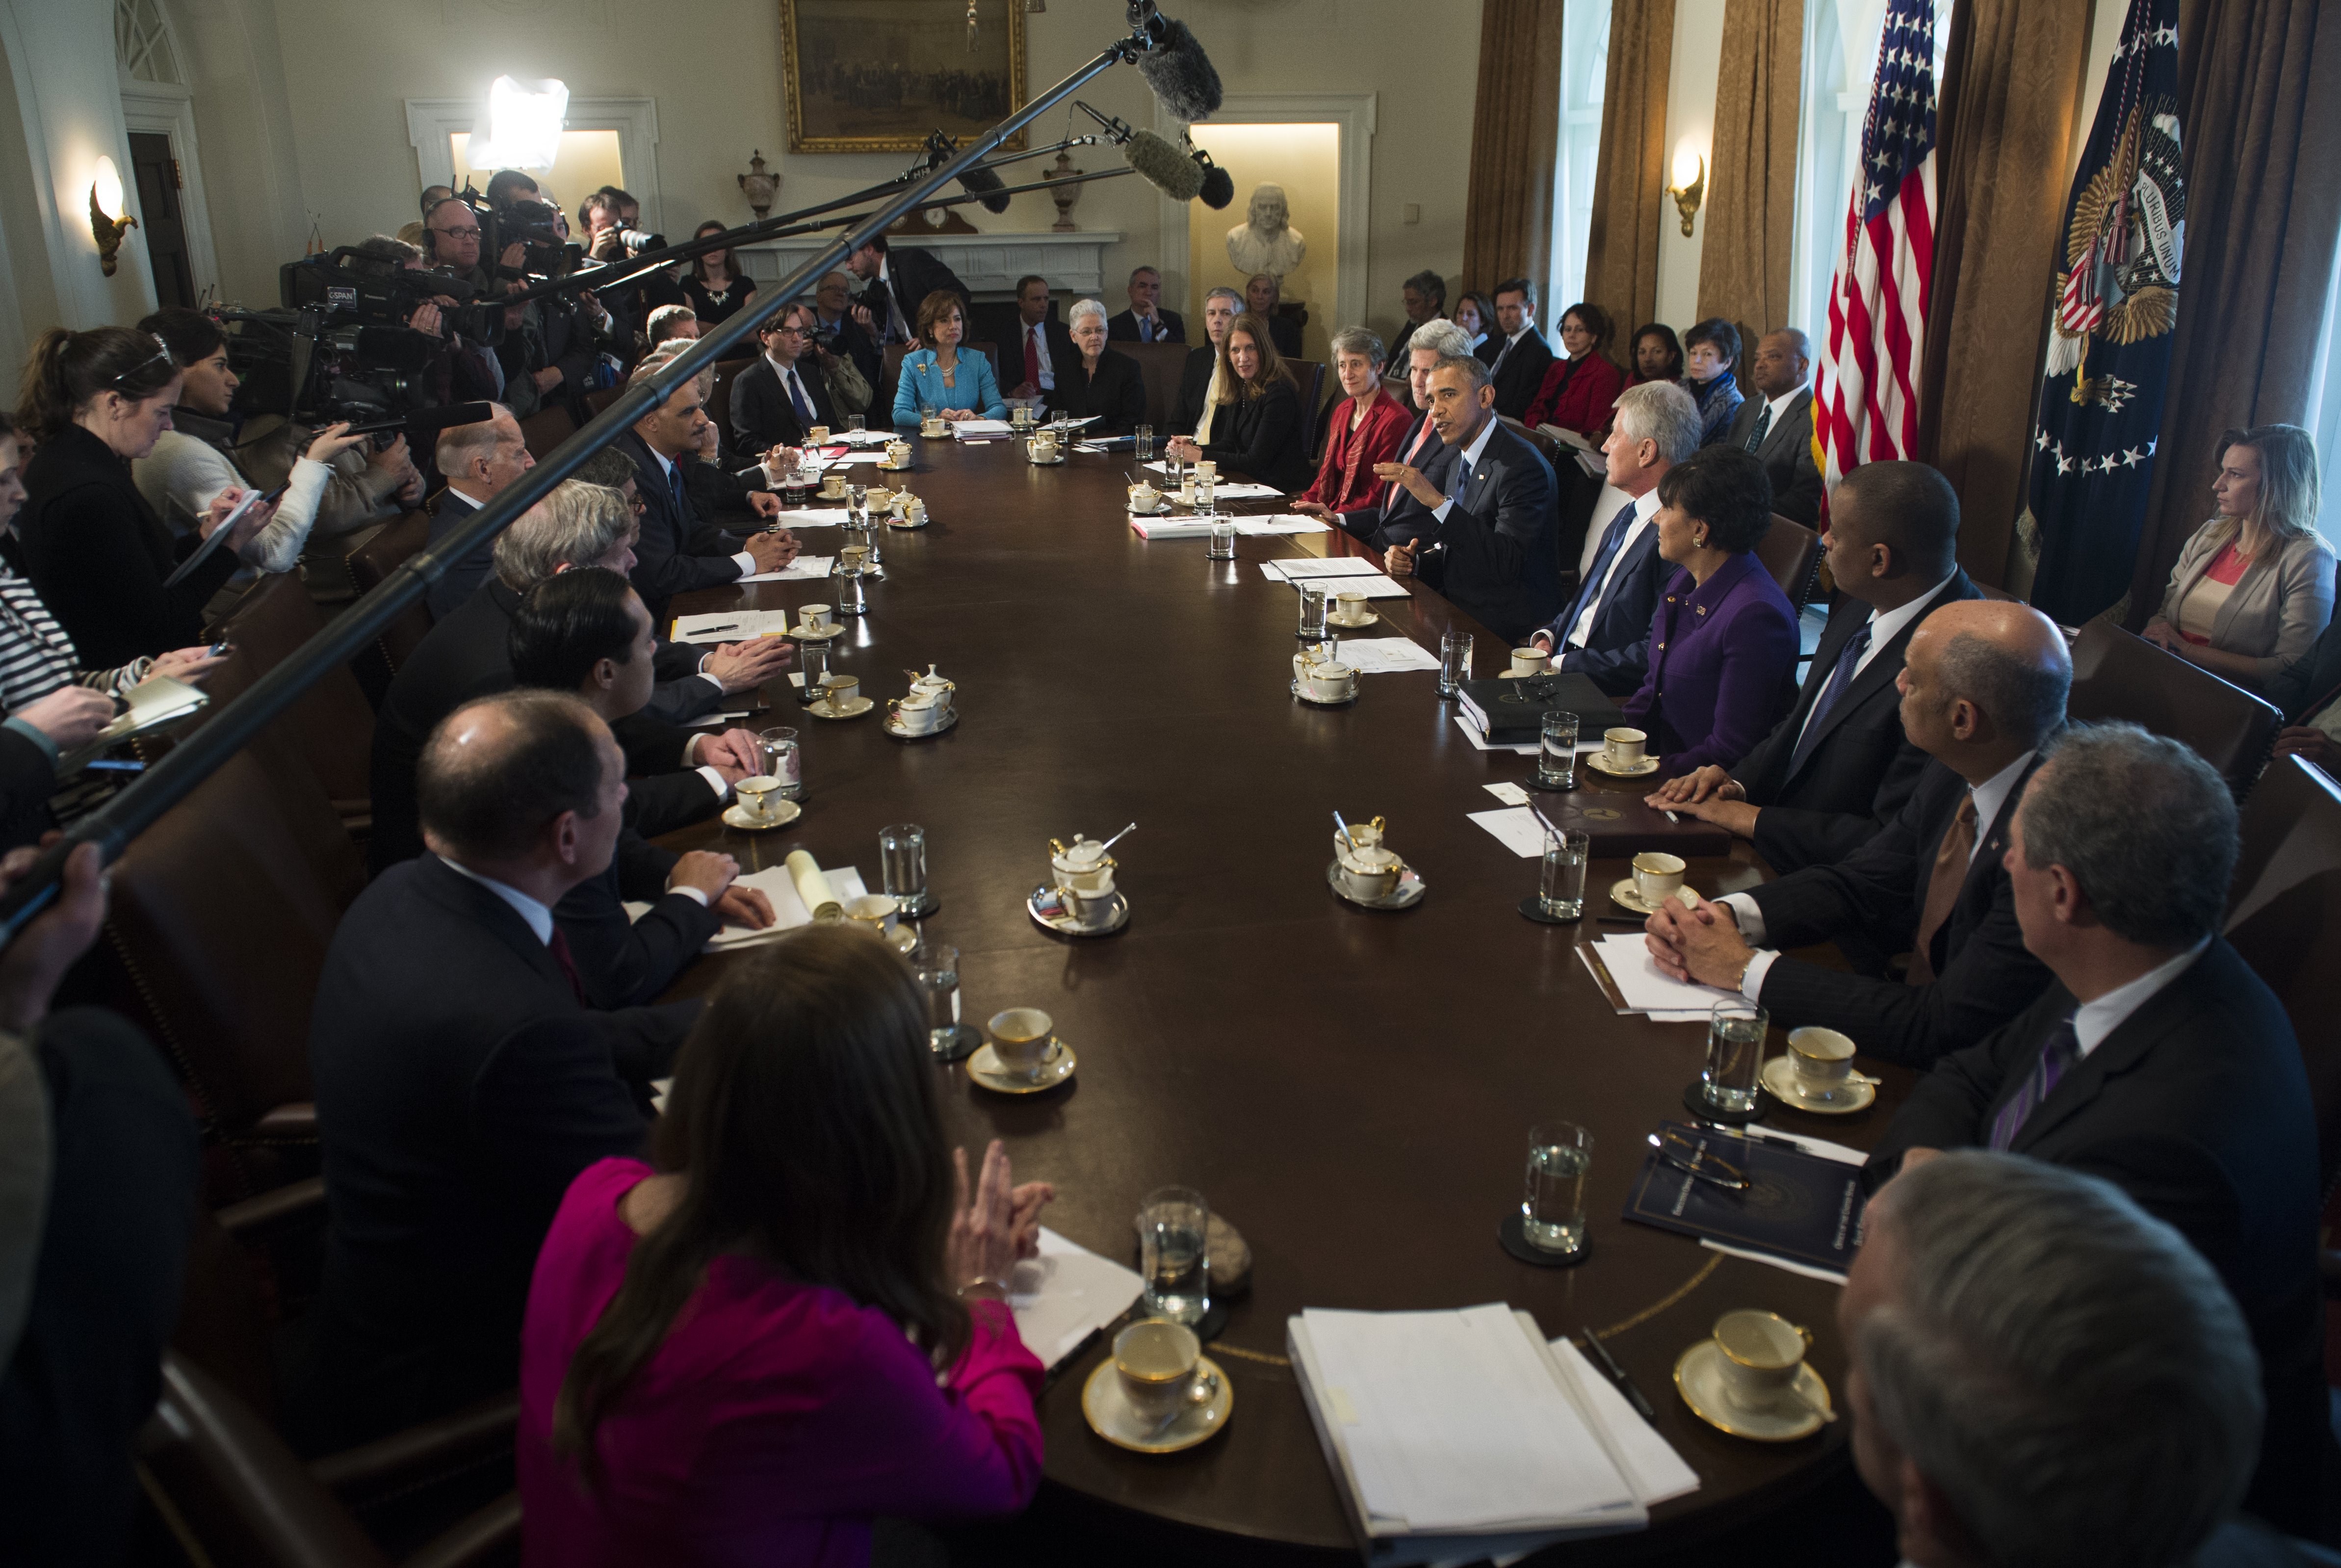 US President Barack Obama speaks during a Cabinet Meeting in the Cabinet Room of the White House in Washington on Feb. 3, 2015. (Saul Loeb—AFP/Getty Images)